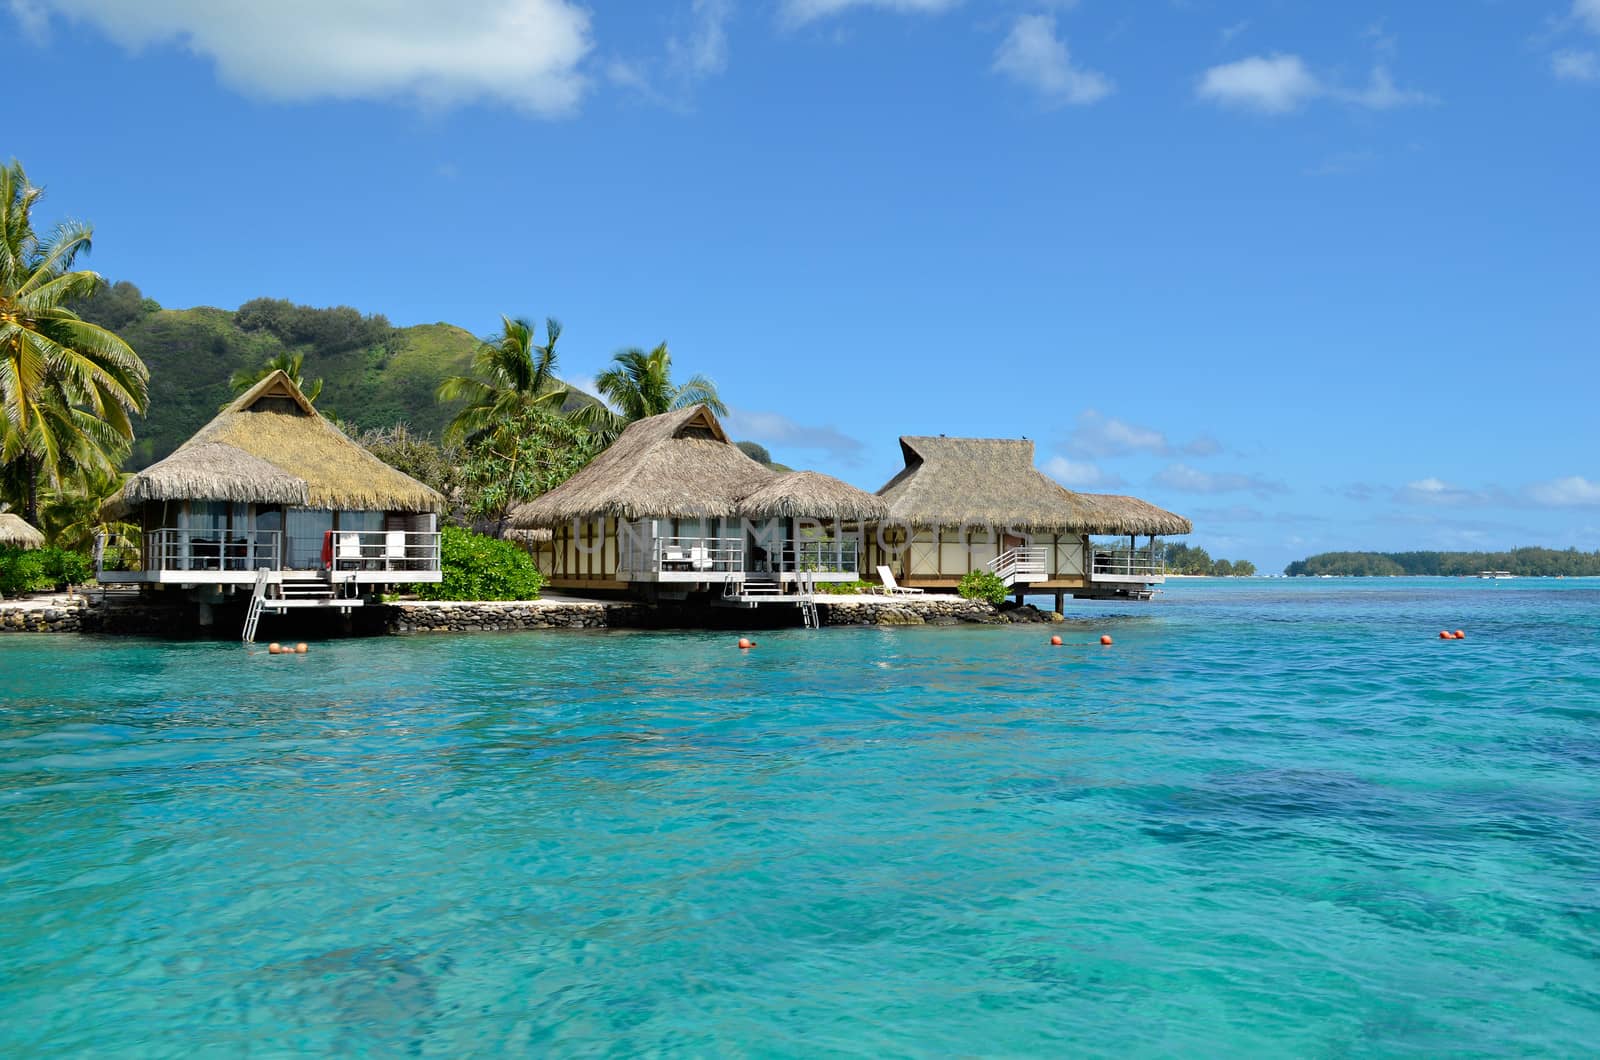 Luxury thatched roof honeymoon bungalows in a vacation resort in the clear blue lagoon of the tropical island of Moorea, near Tahiti, in French Polynesia.